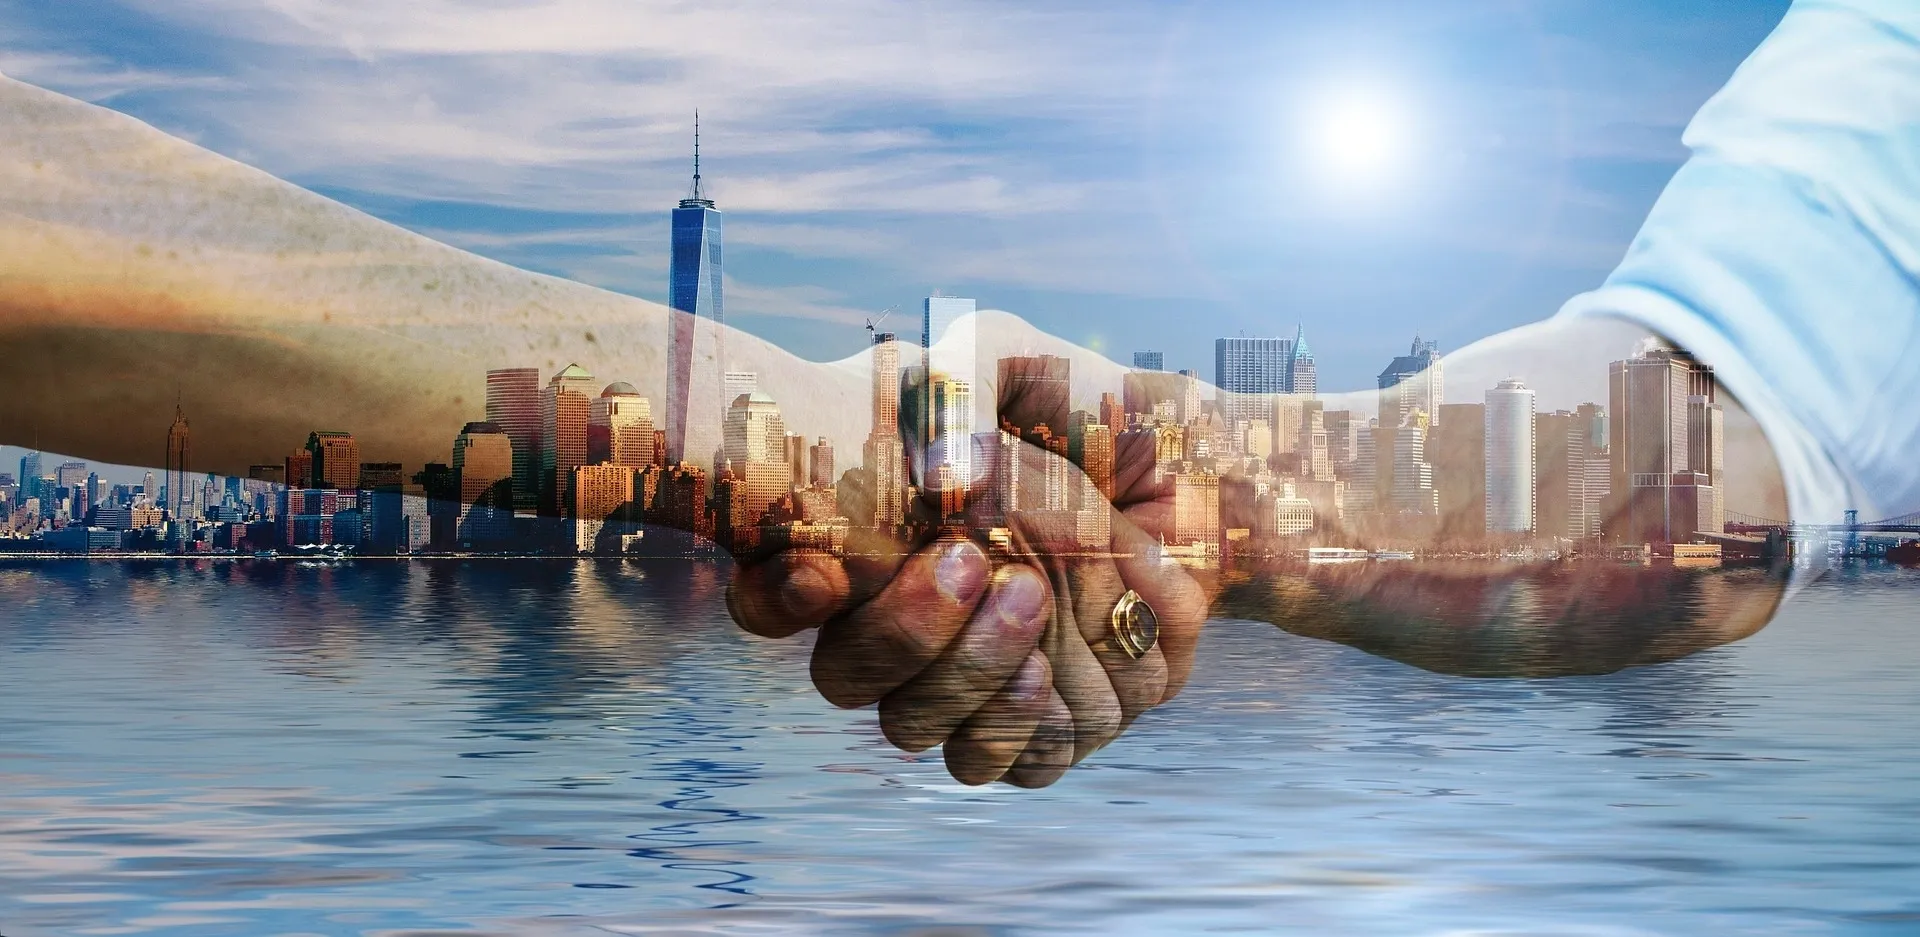 Two hands holding each other in front of a city skyline.